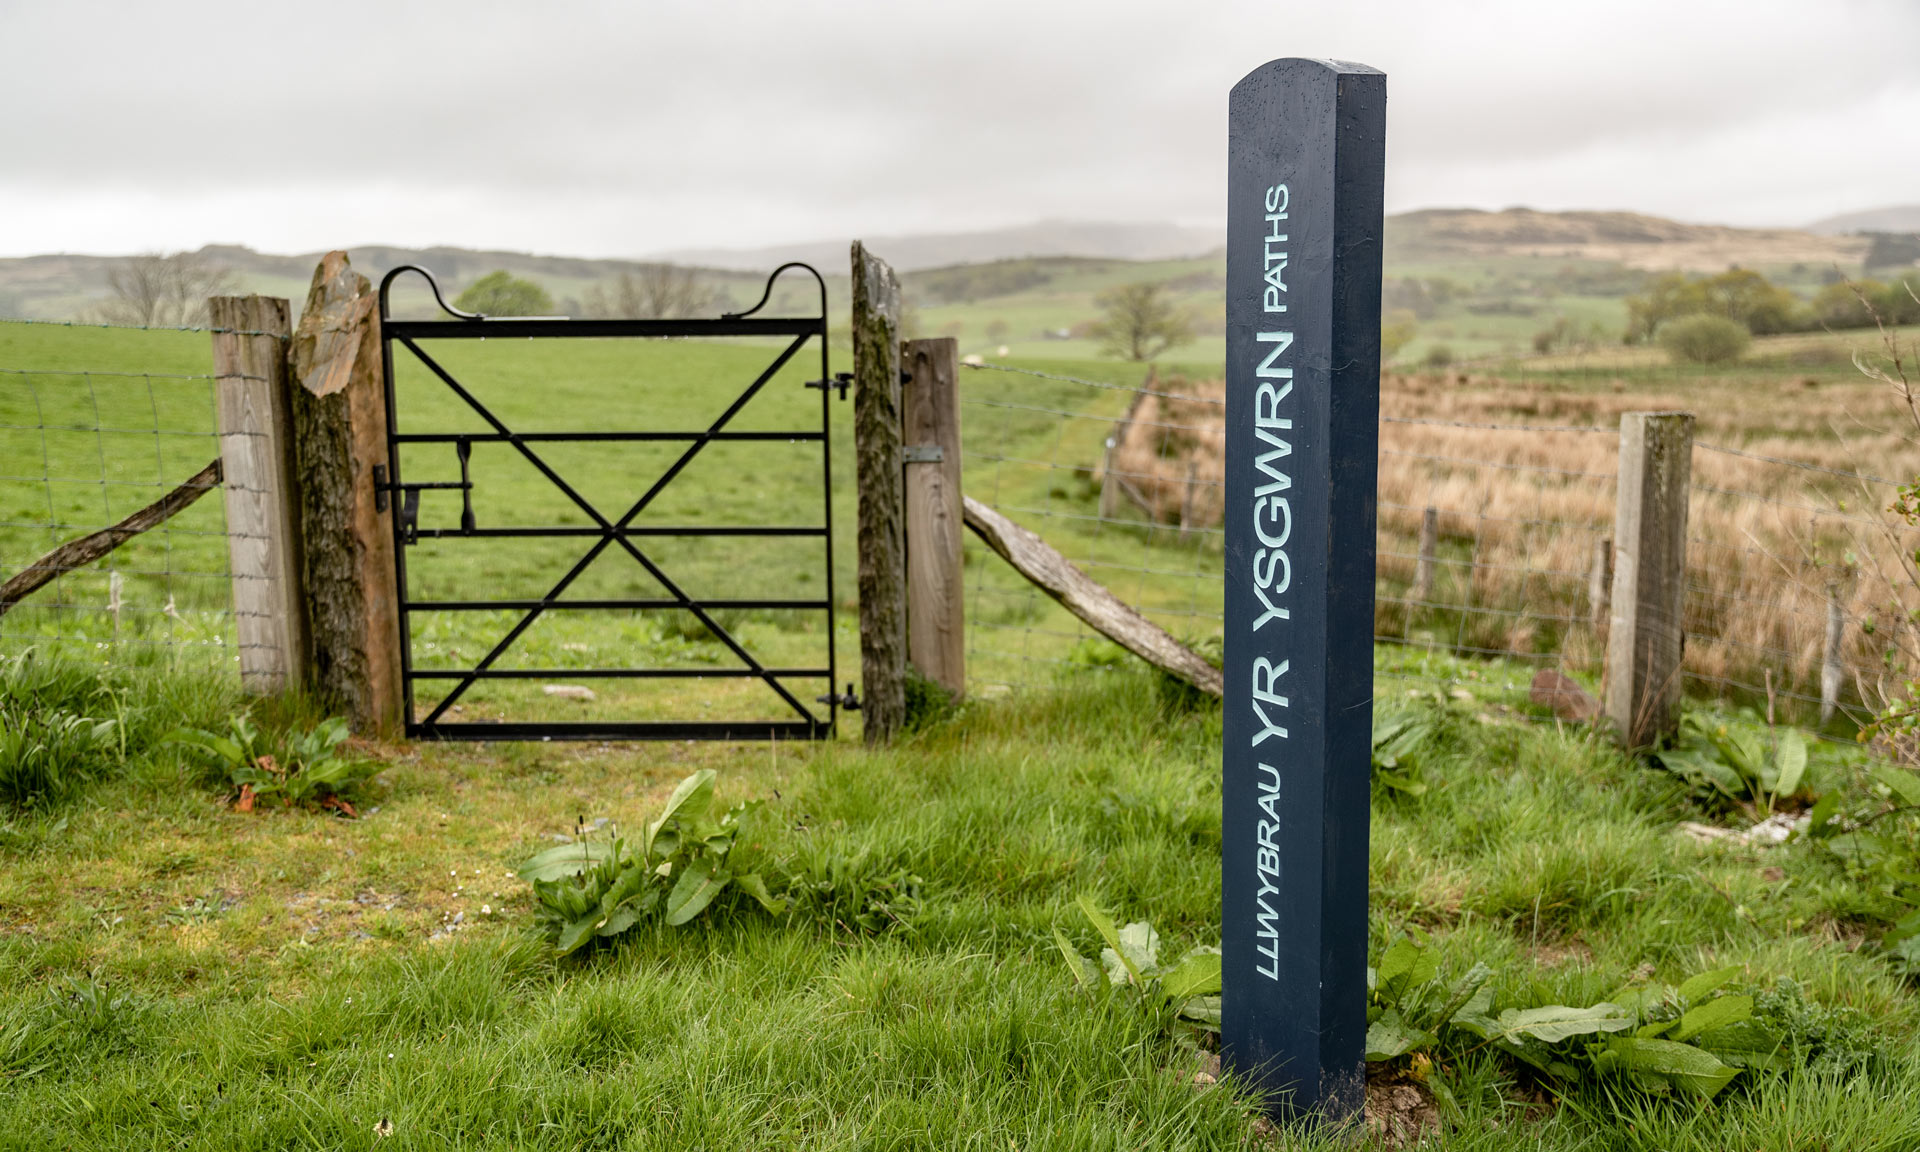 A signpost with 'Yr Ysgwrn Paths' stands by a gate that leads onto Yr Ysgwrn's walking paths